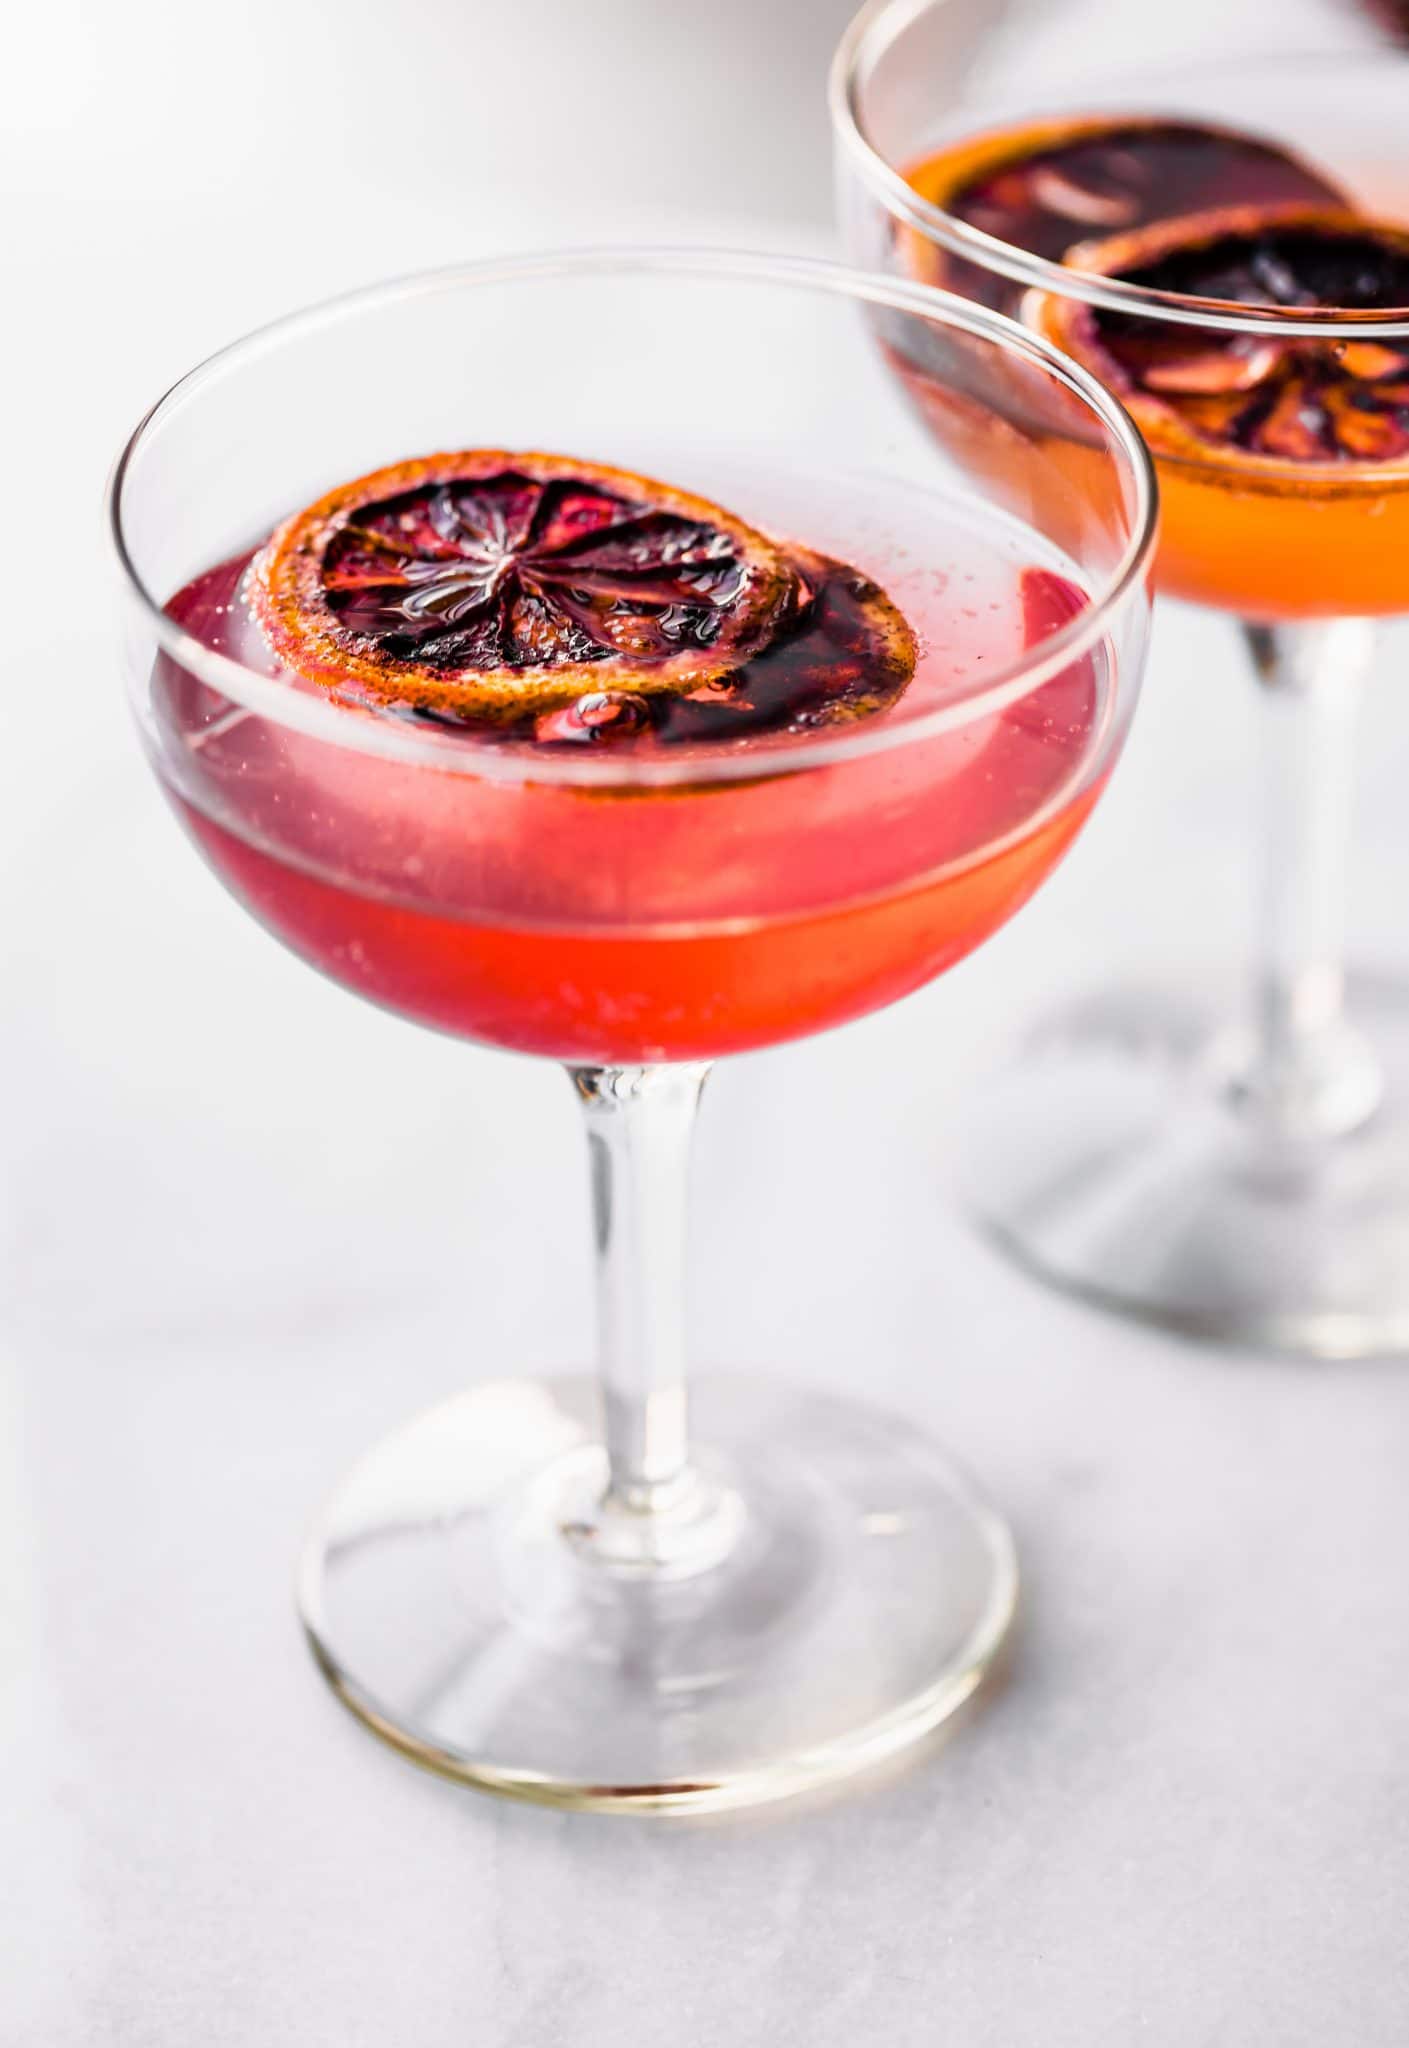 oven dried orange slices as garnish in cranberry cocktails